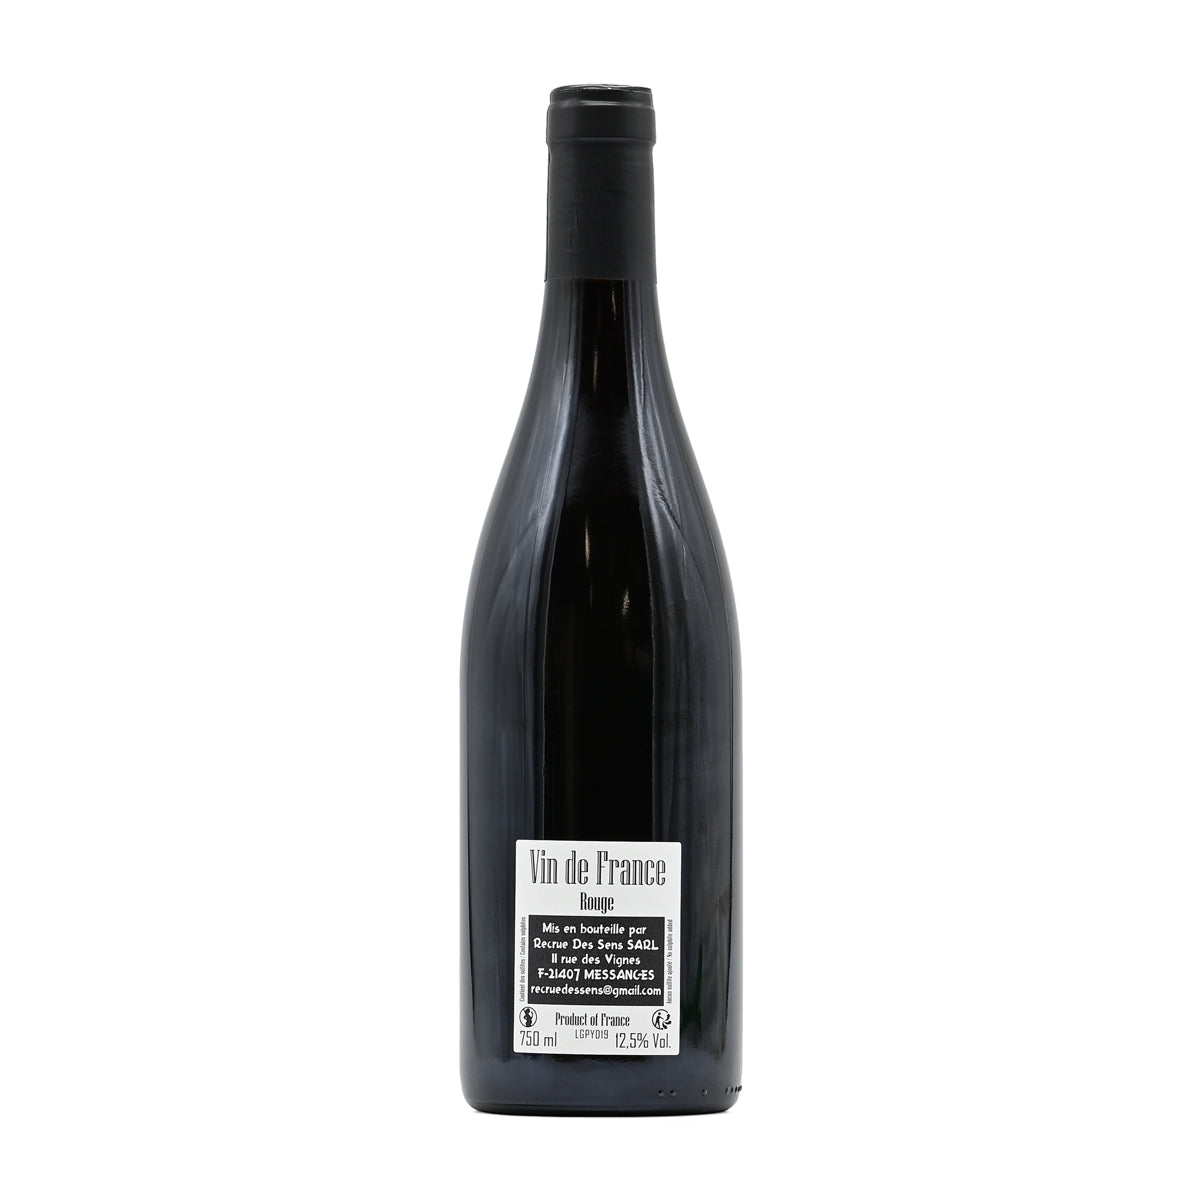 Yann Durieux VDF Les Grands Ponts Rouge 2019, 750ml French red wine, made from Pinot Noir; Vin de France, from Recrue Des Sens, Burgundy, France – GDV Fine Wines, Hong Kong